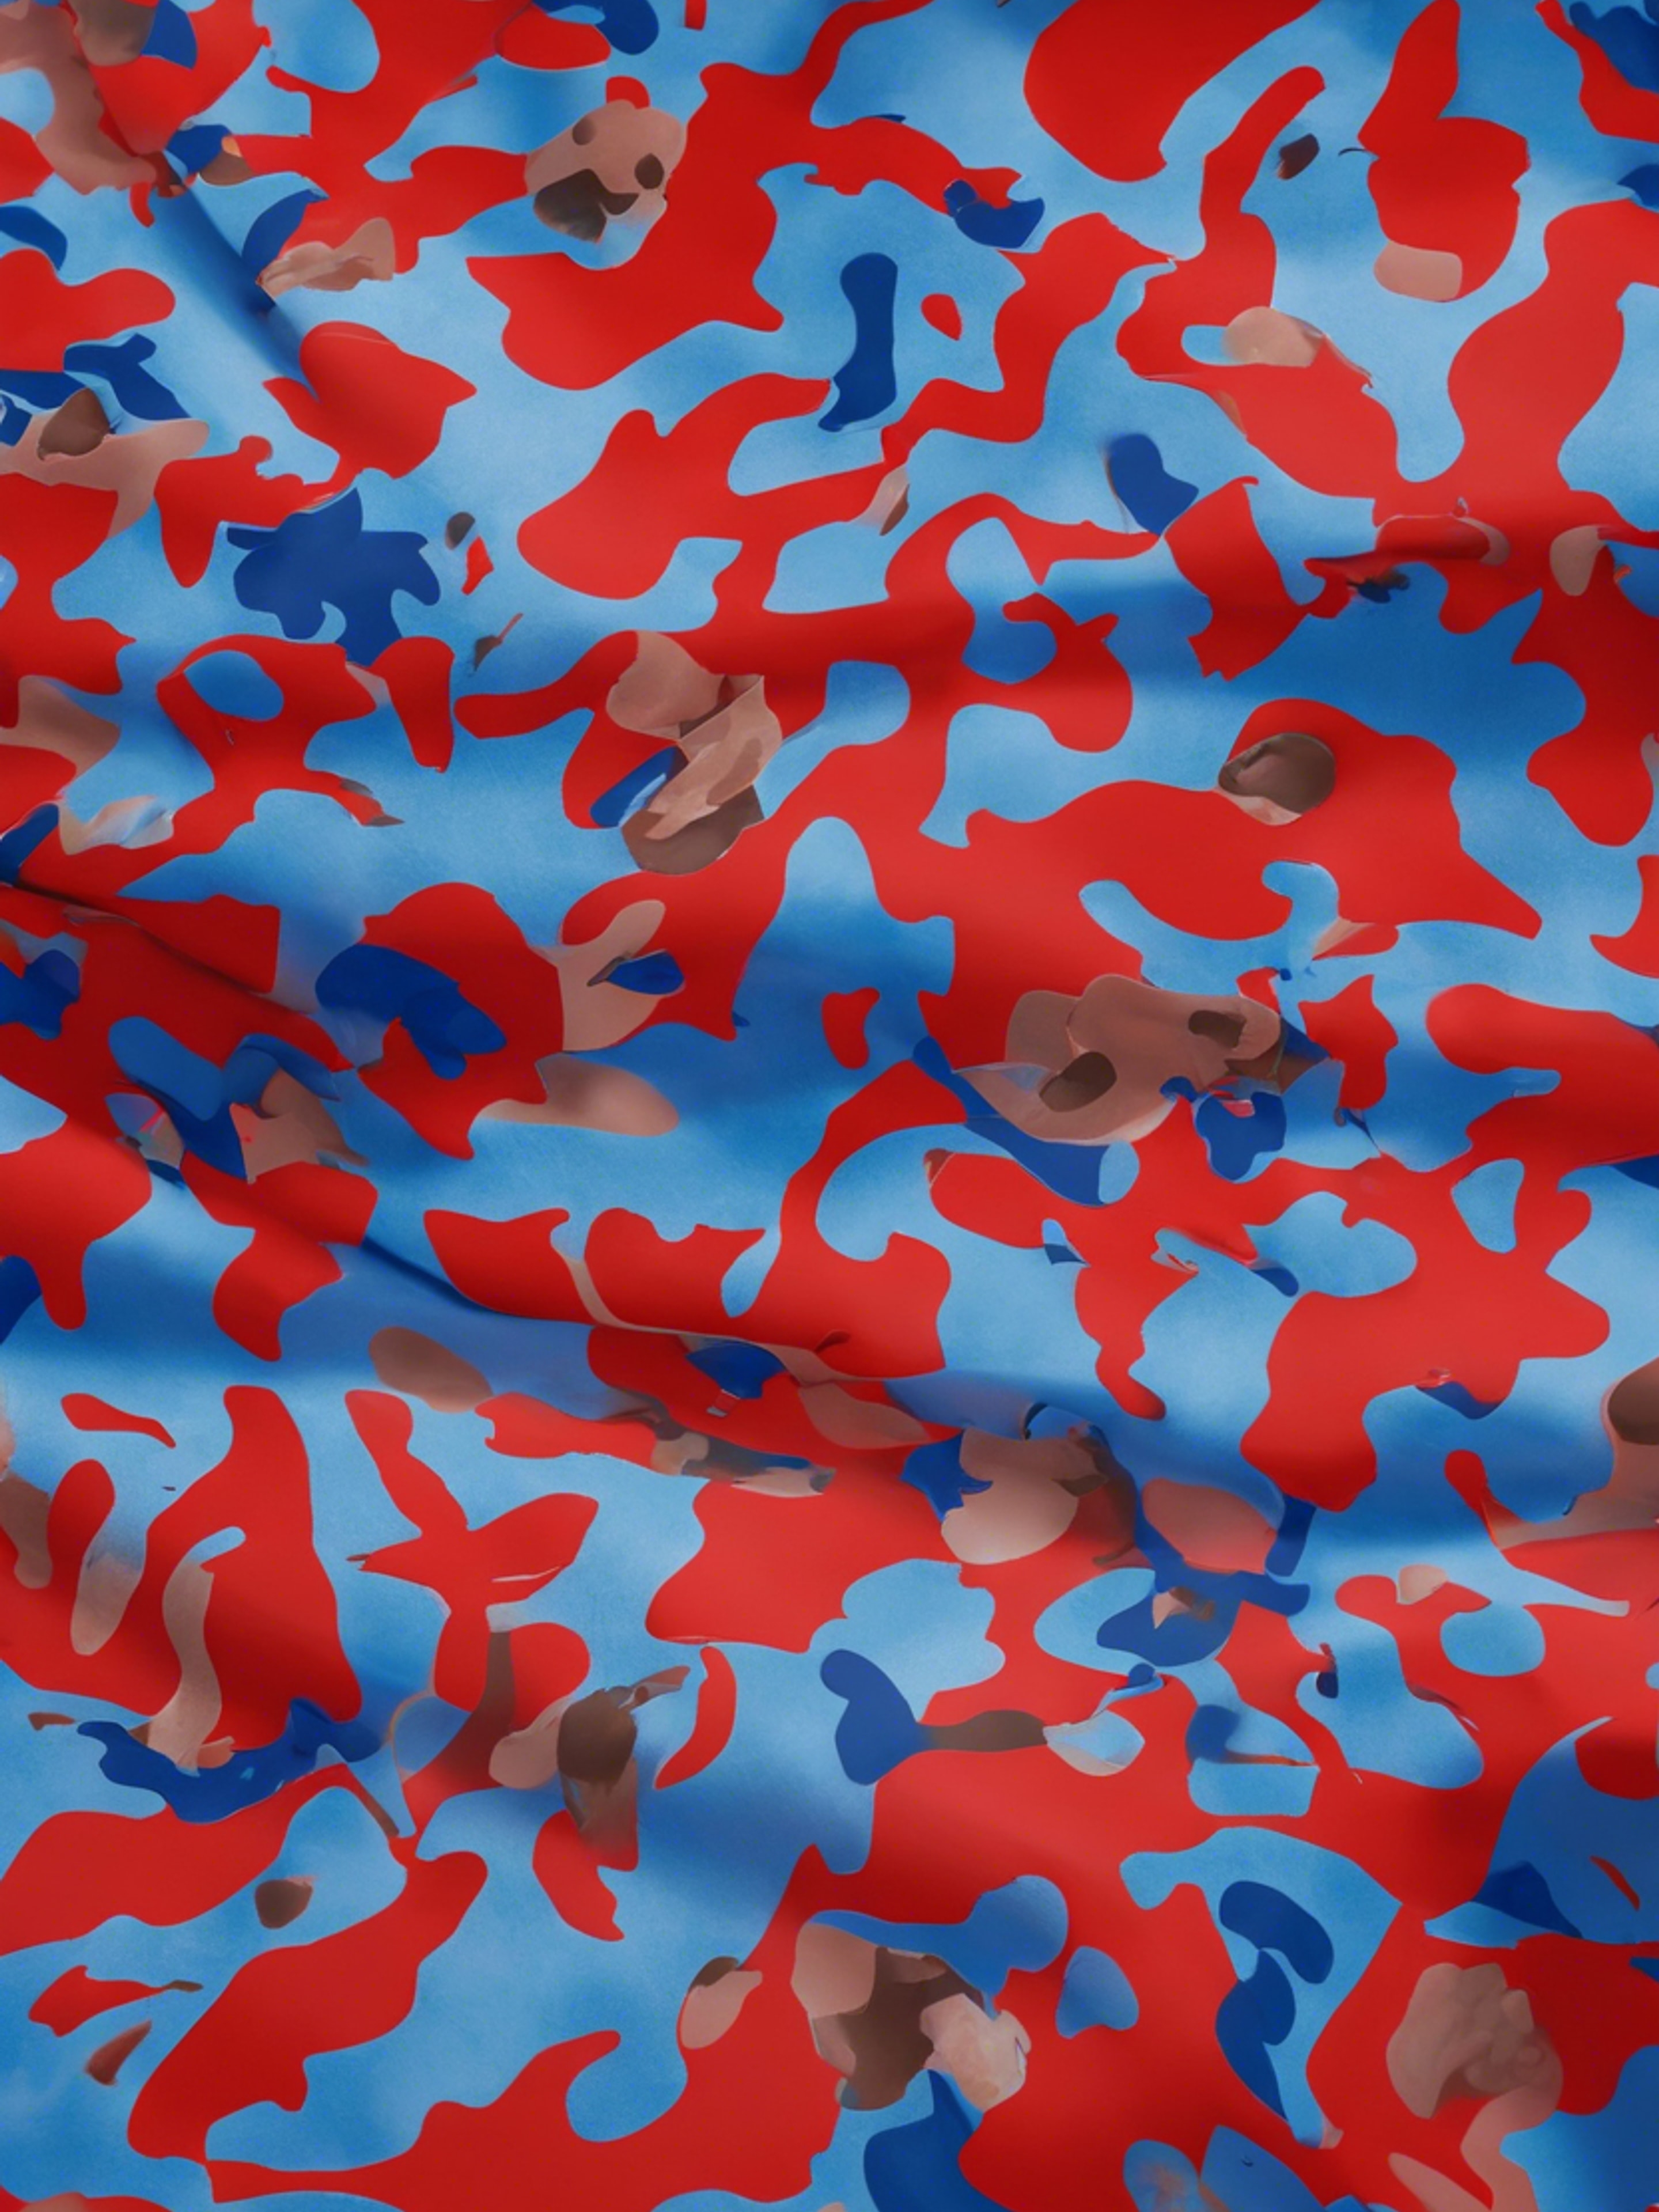 High-quality red and blue camouflage wrapping paper. Papel de parede[4b47f7d82a744ca8b045]